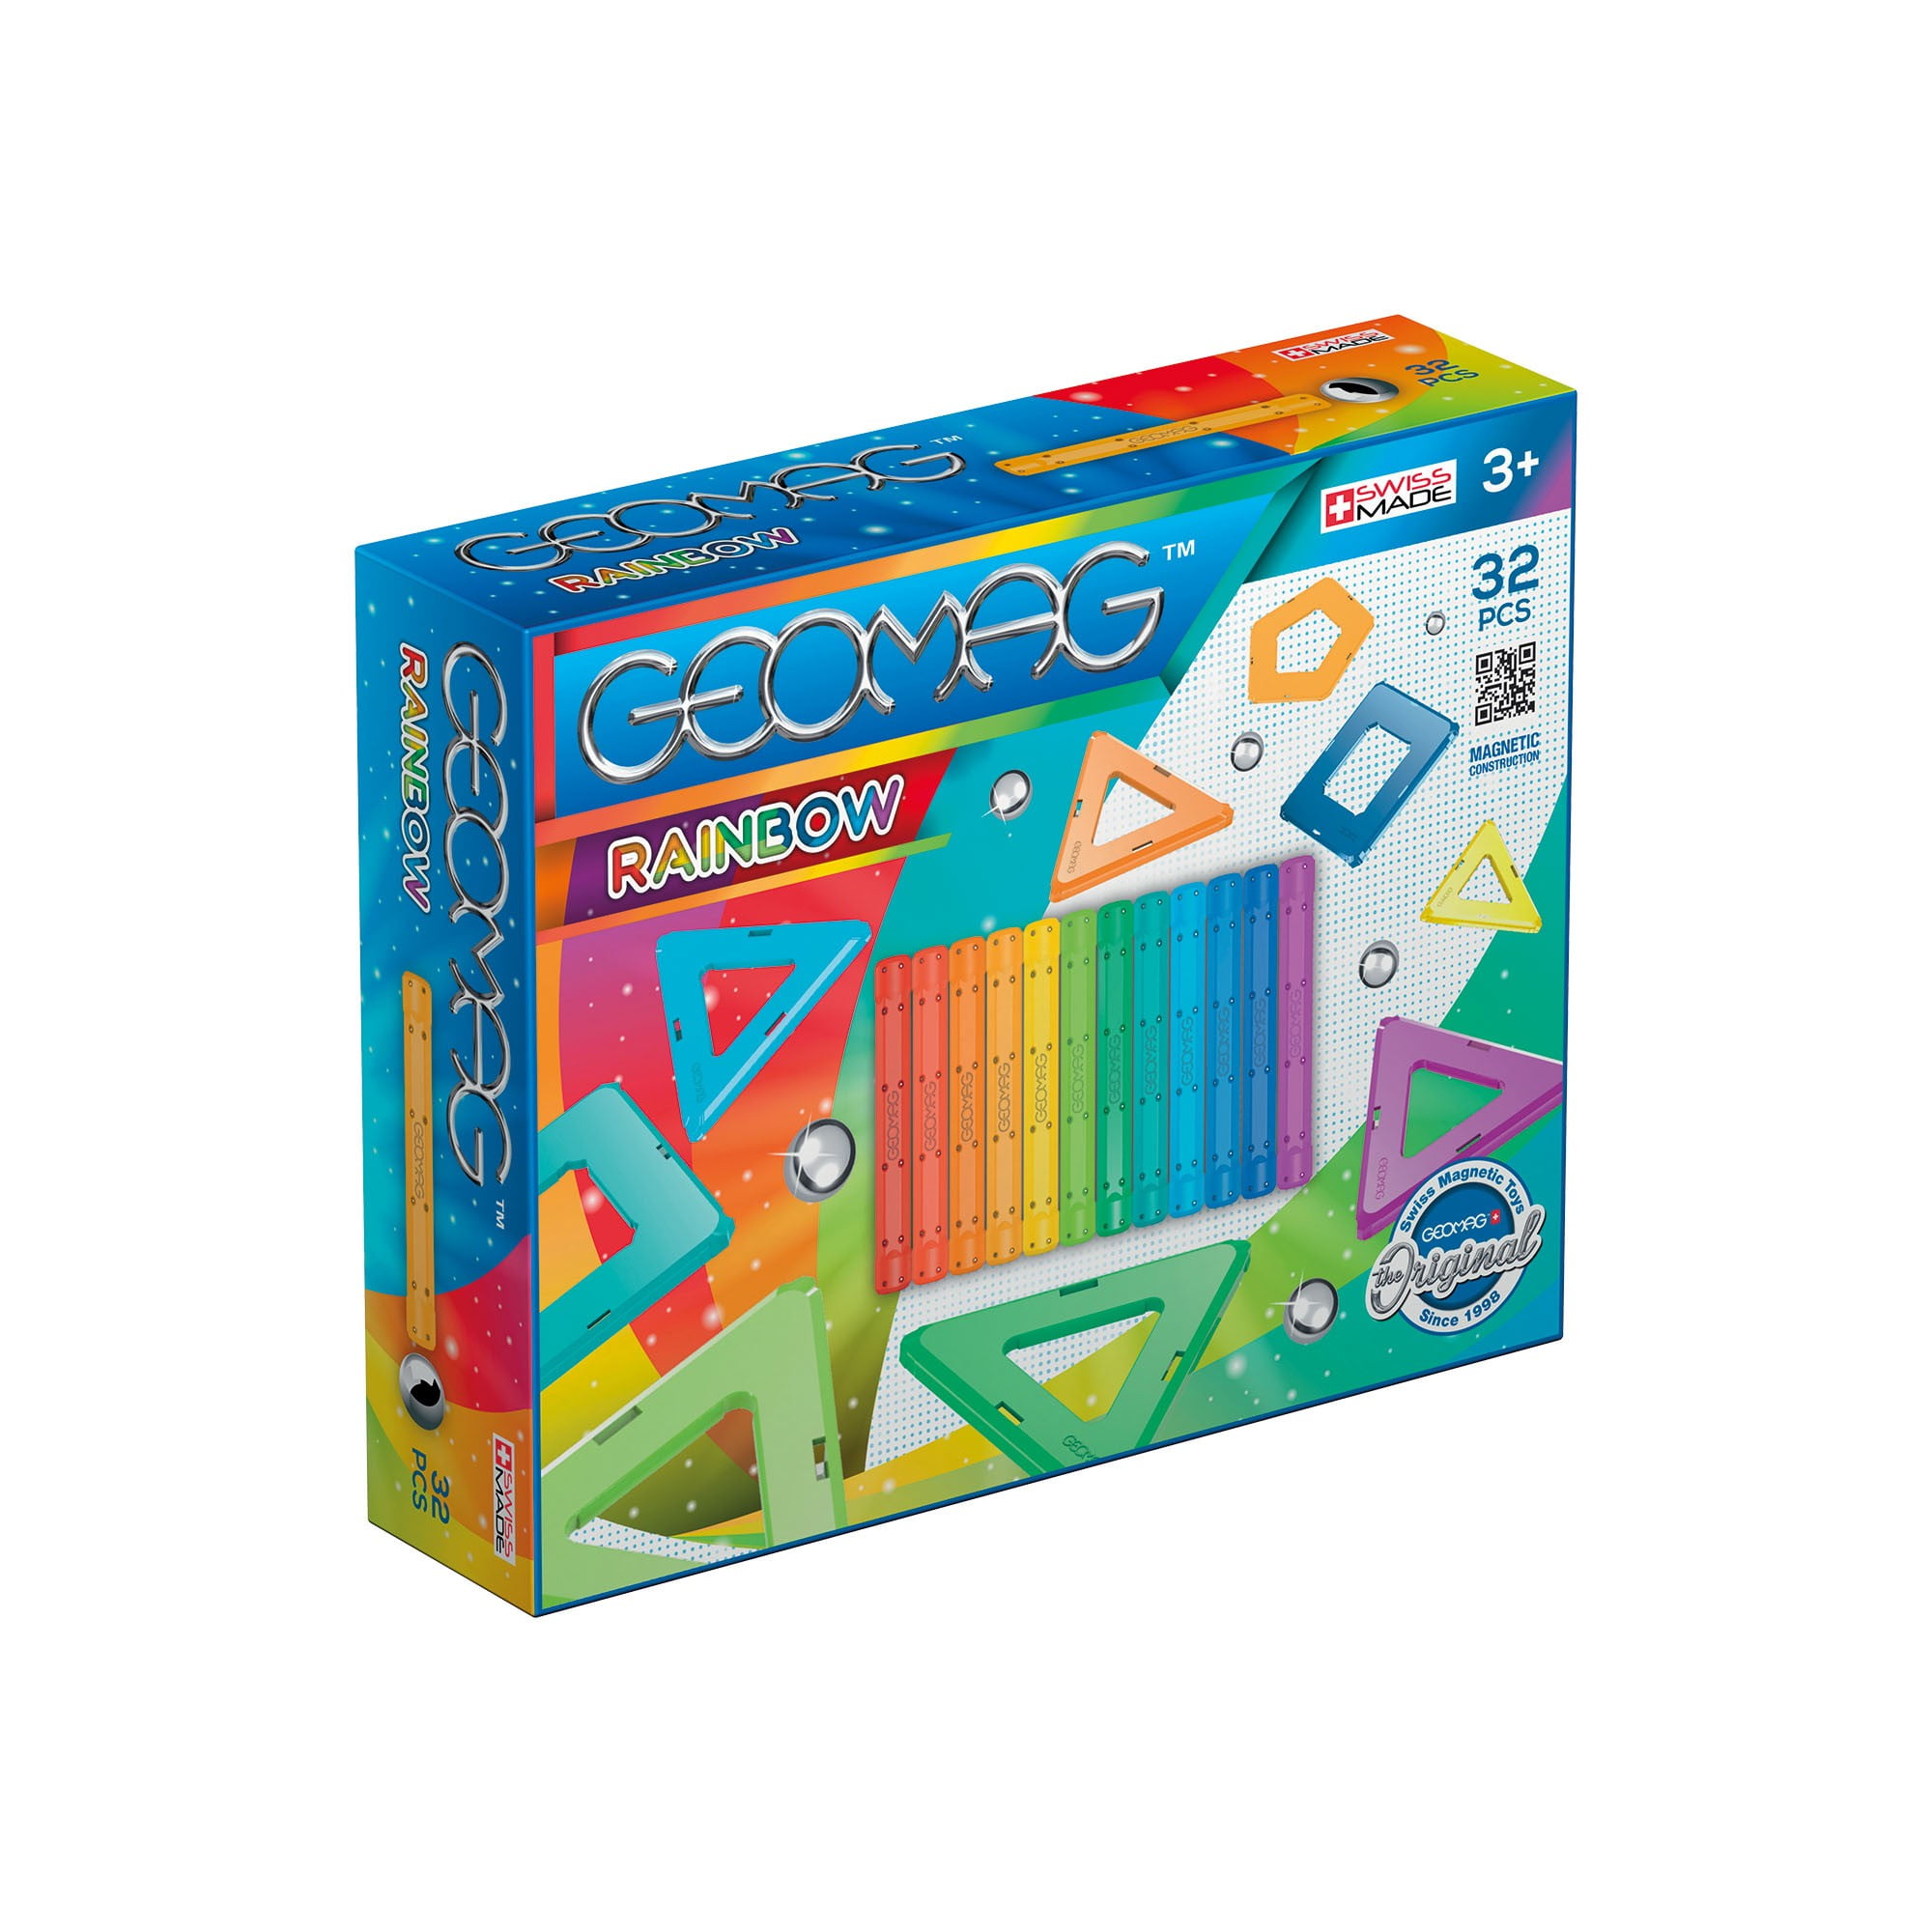 32 PIECES GEOMAG 370 RAINBOW SET CONSTRUCTION TOY 